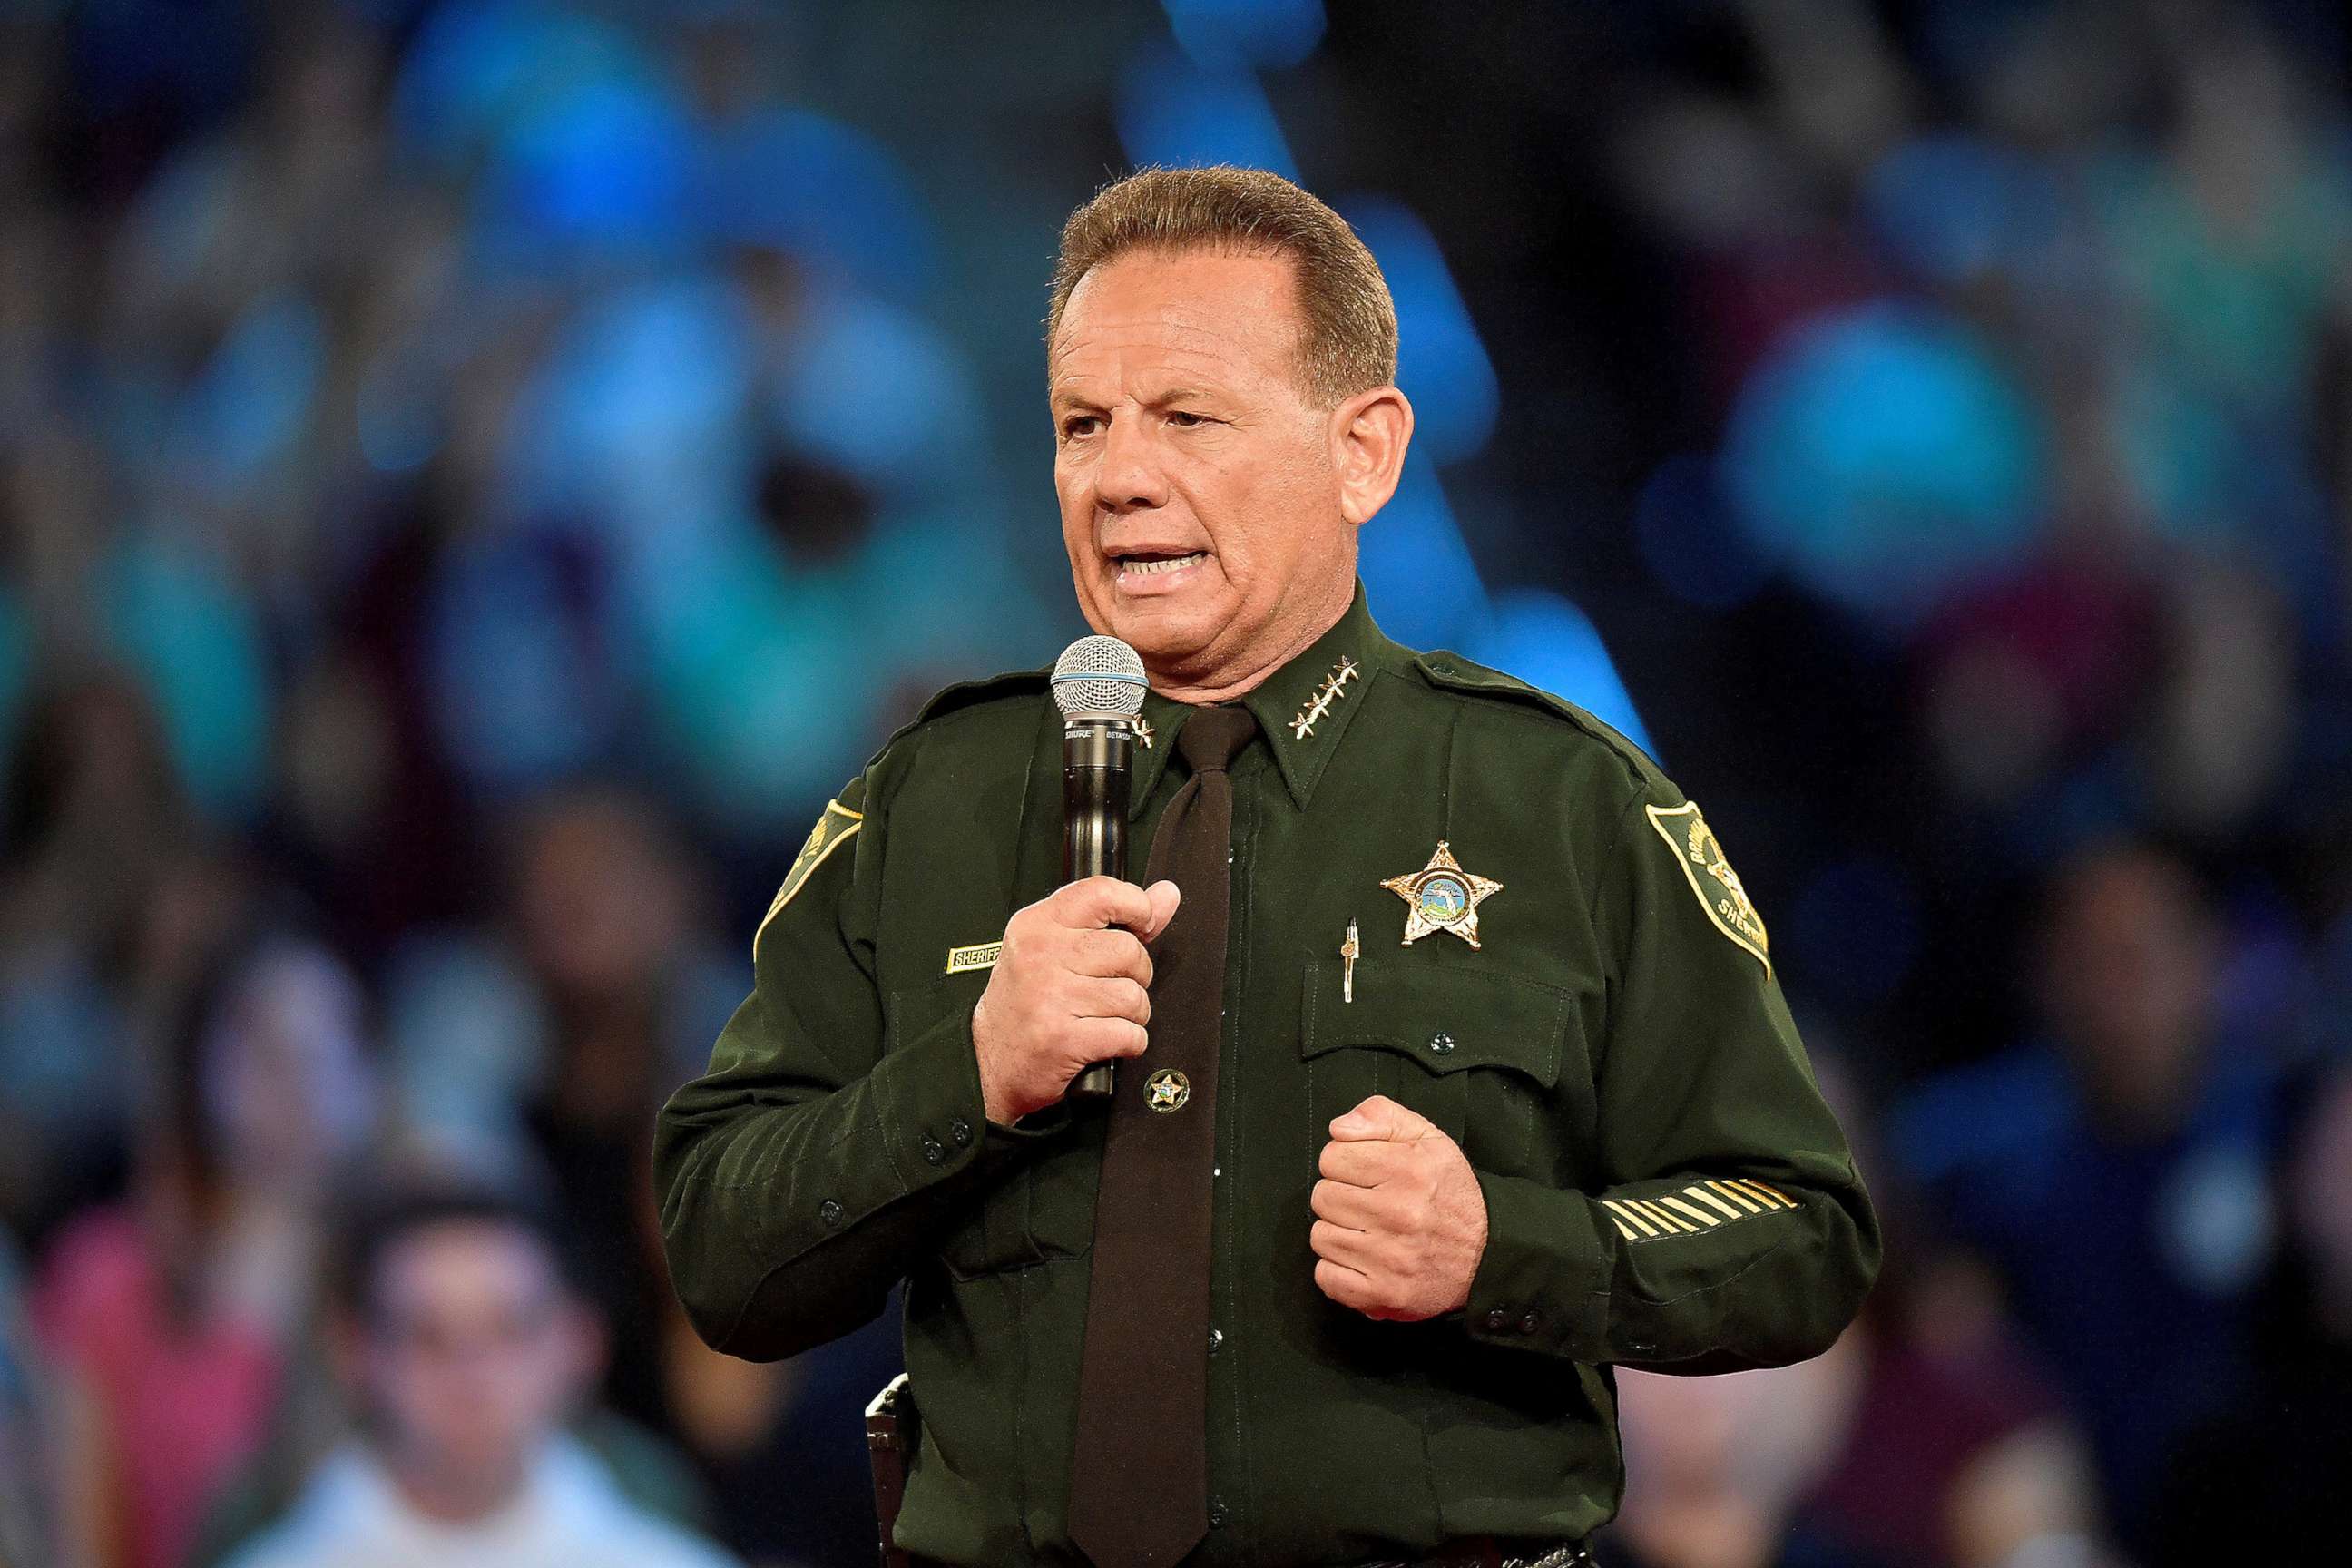 PHOTO: Broward County Sheriff Scott Israel speaks before the start of a CNN town hall meeting at the BB&T Center in Sunrise, Fla., Feb. 21, 2018.